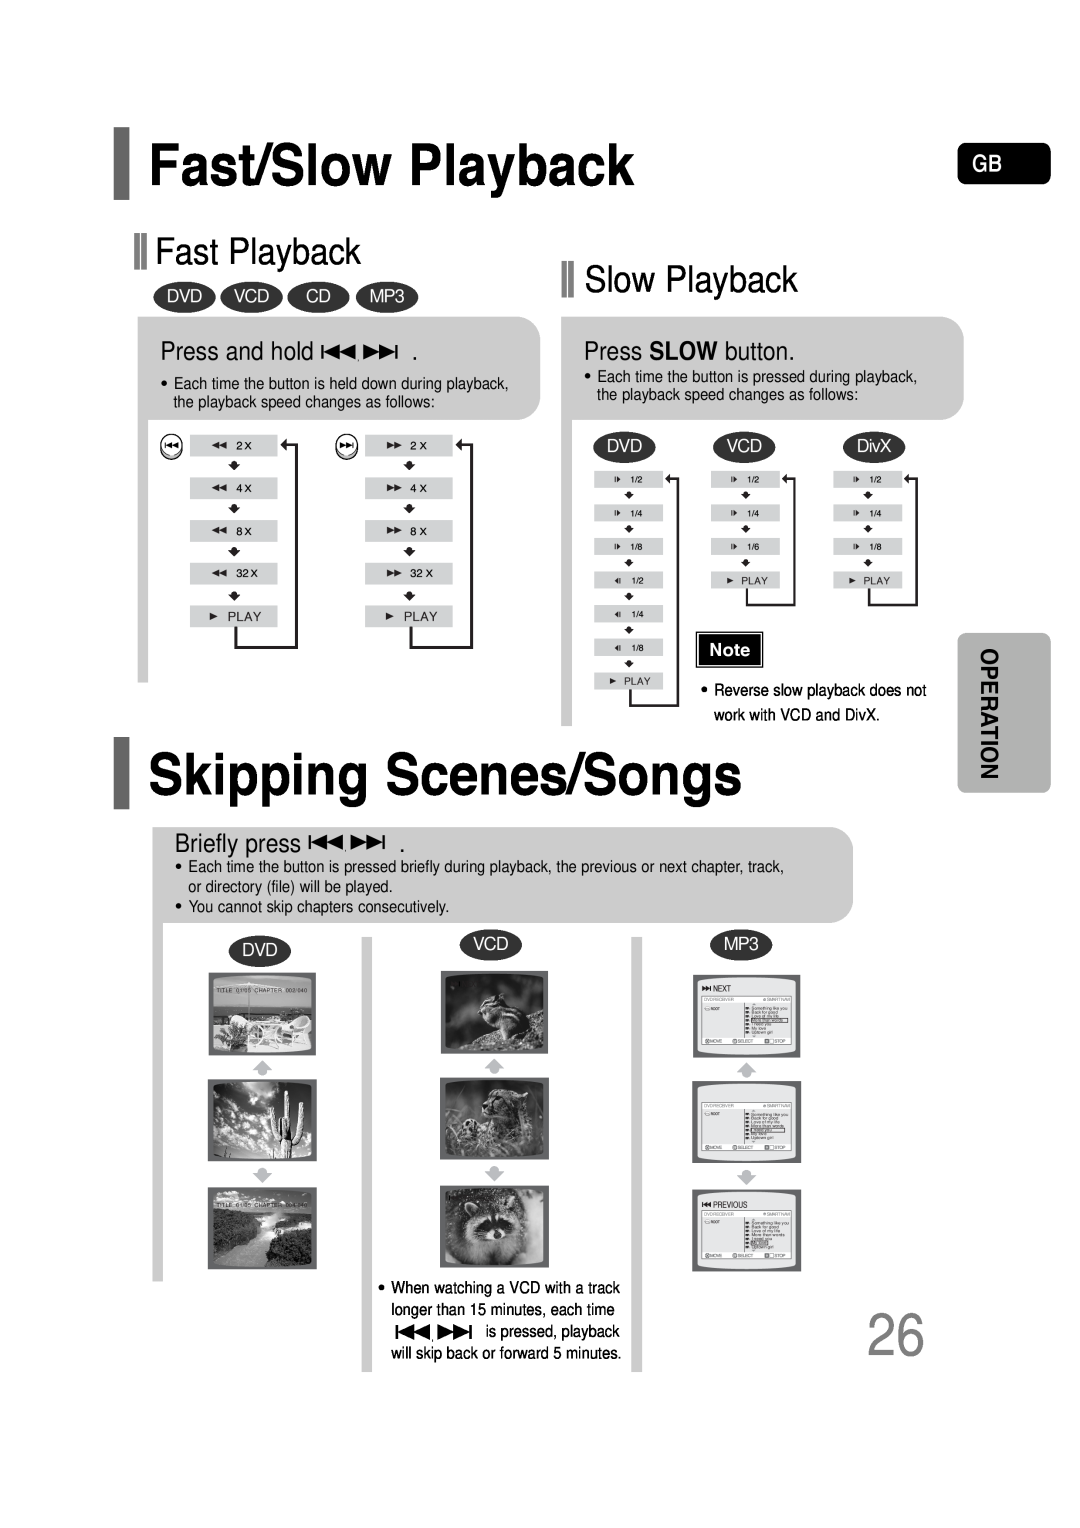 Samsung HT-P30 Fast/Slow Playback, Skipping Scenes/Songs, Fast Playback, Press and hold, Press SLOW button, Briefly press 